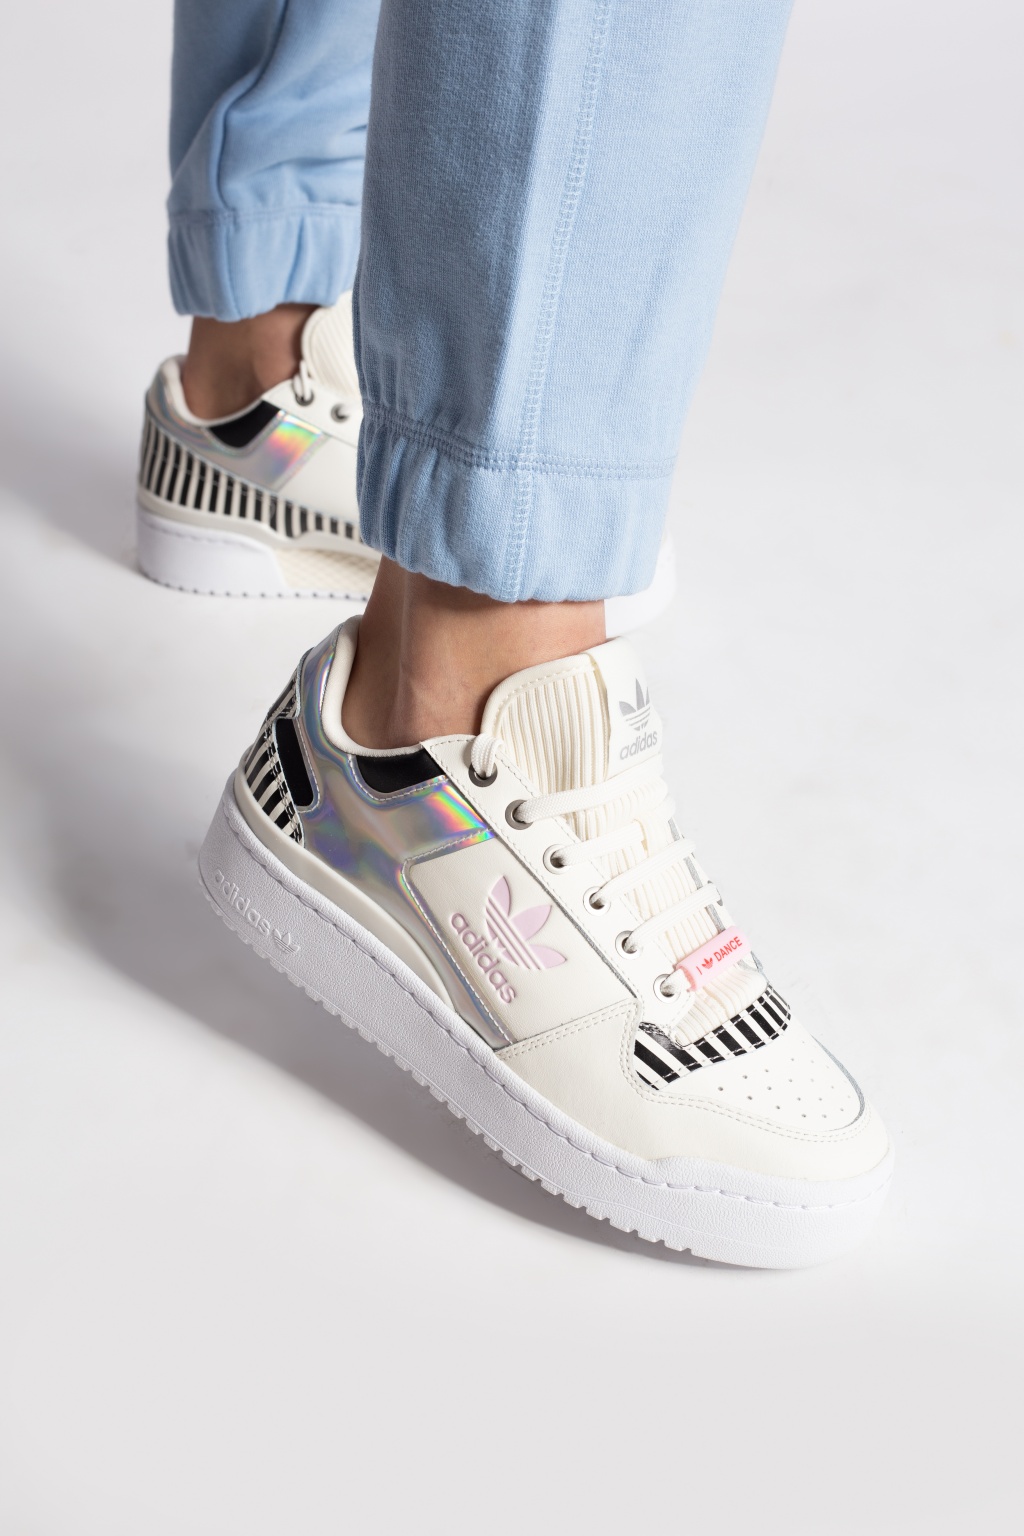 Women's Shoes | adidas sample south india test results | IetpShops | ADIDAS Originals 'Forum sneakers